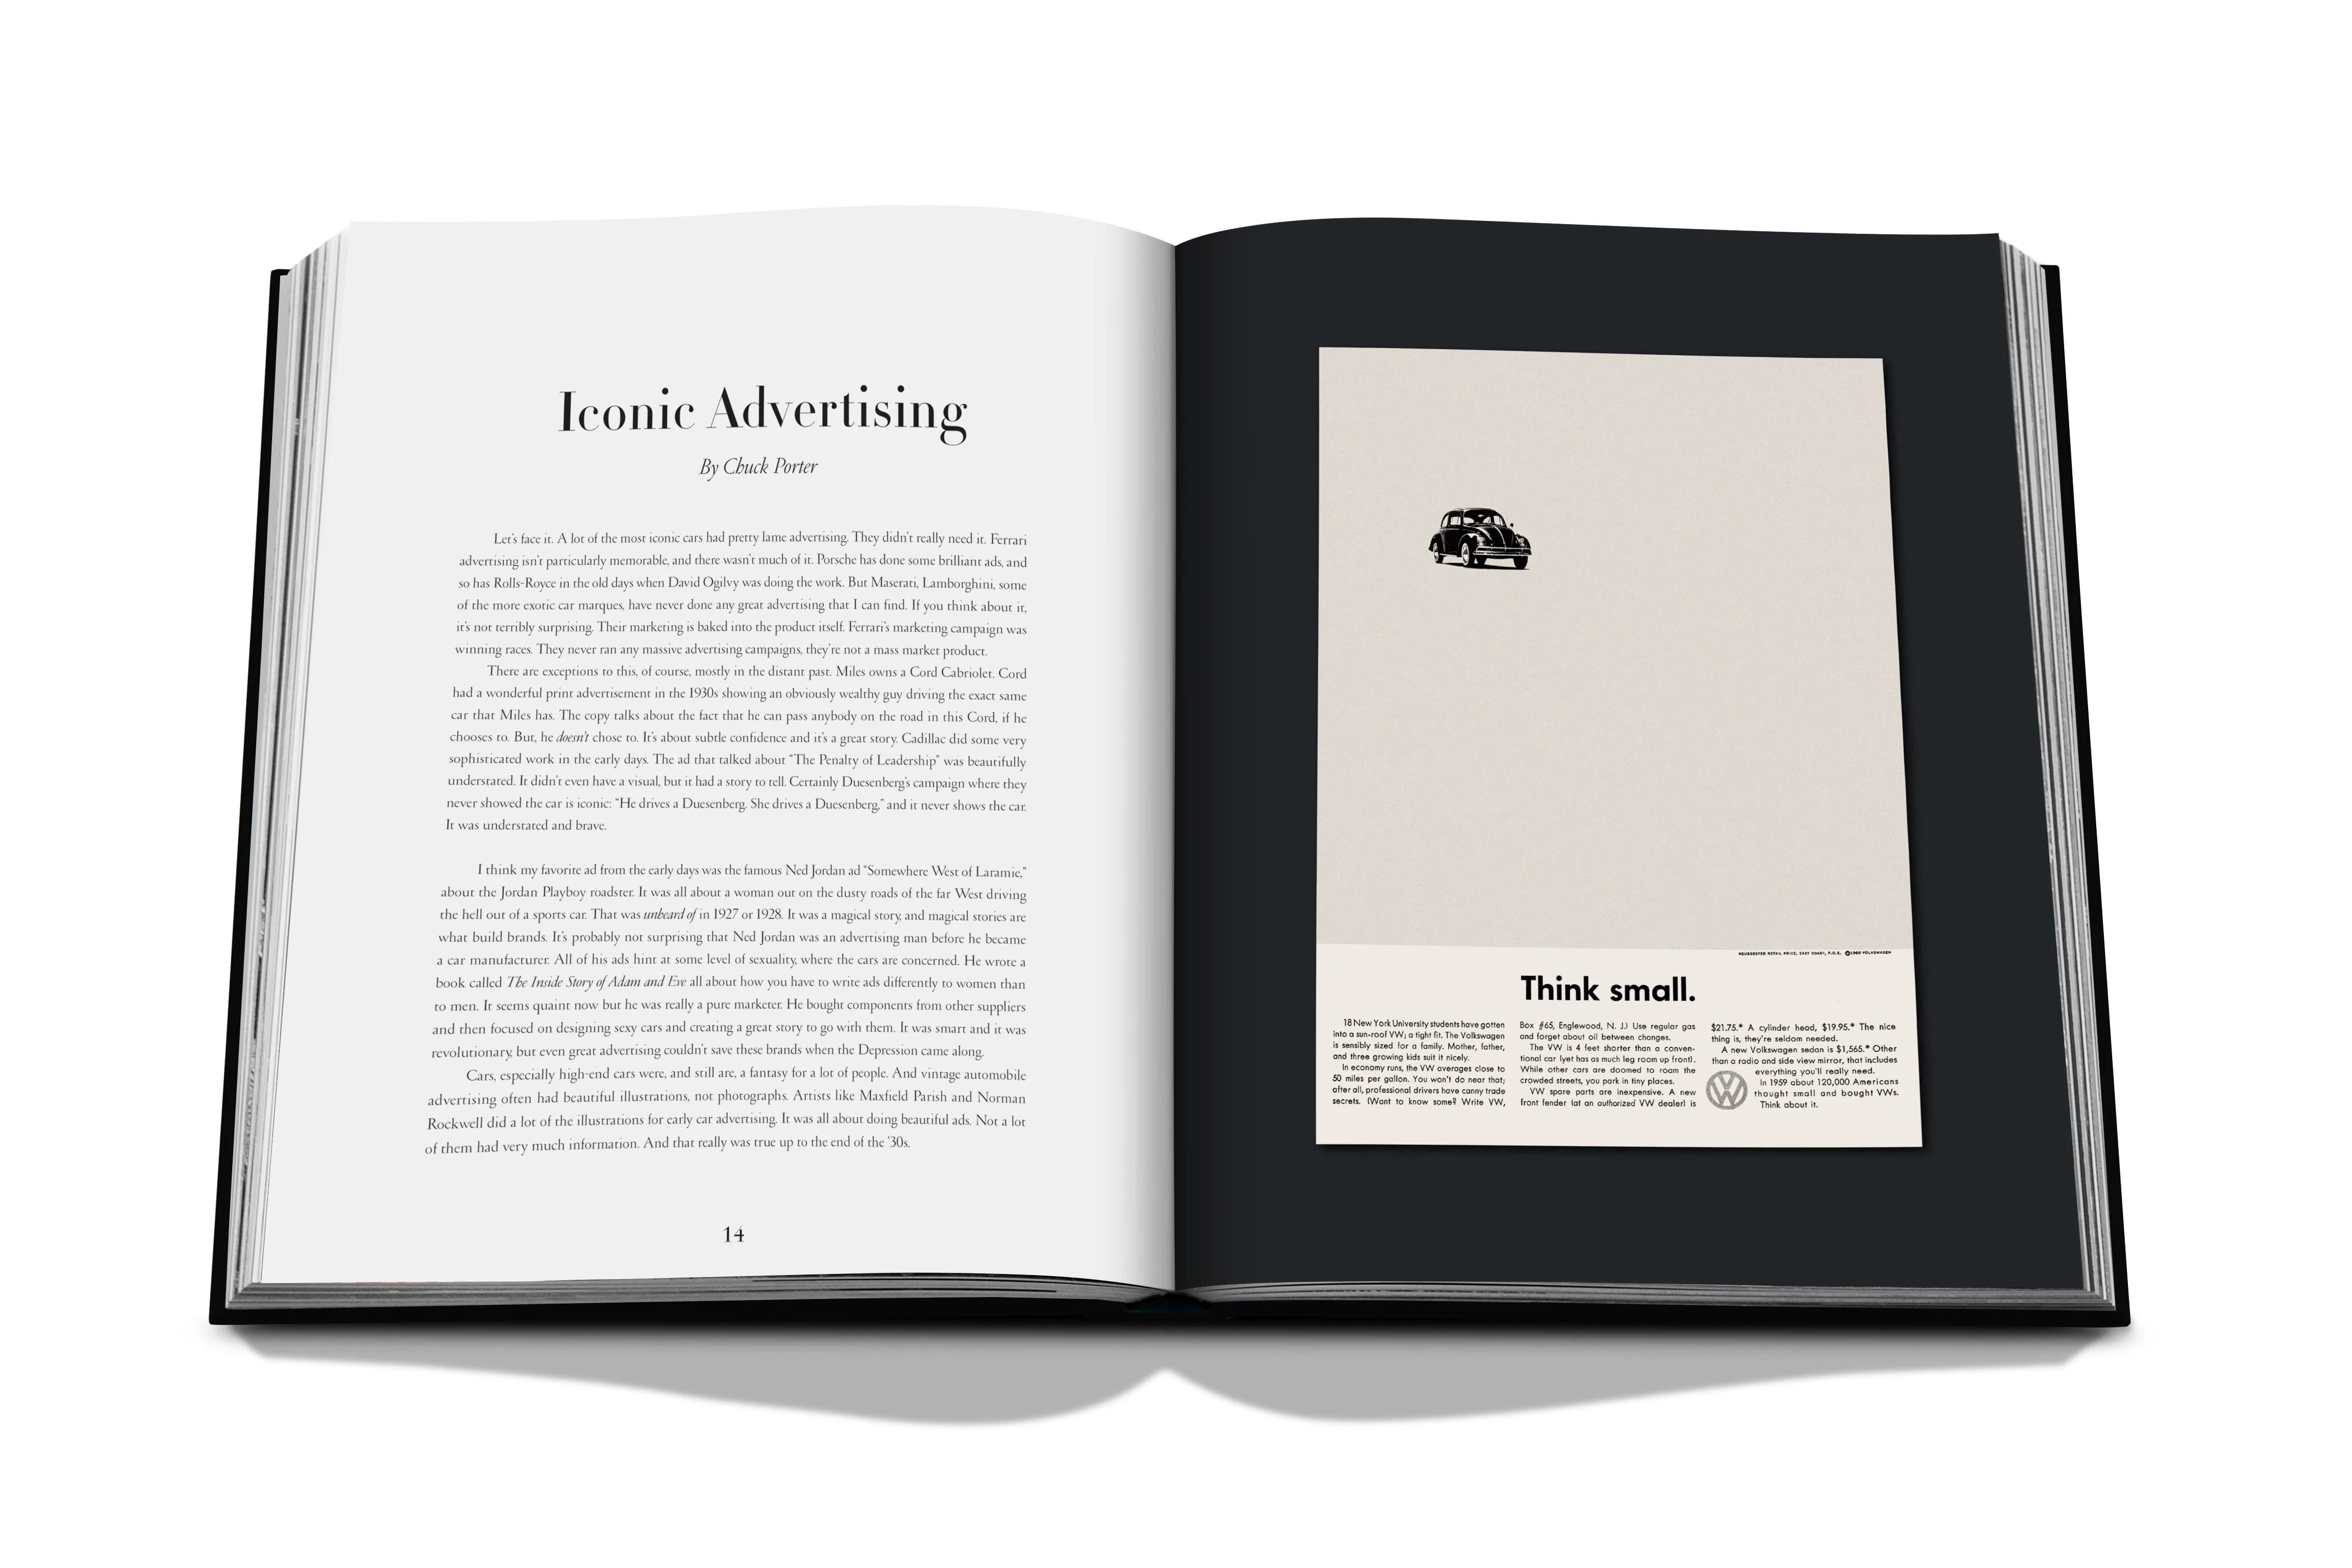 Iconic: Art, Design, Advertising, and the Automobile Book